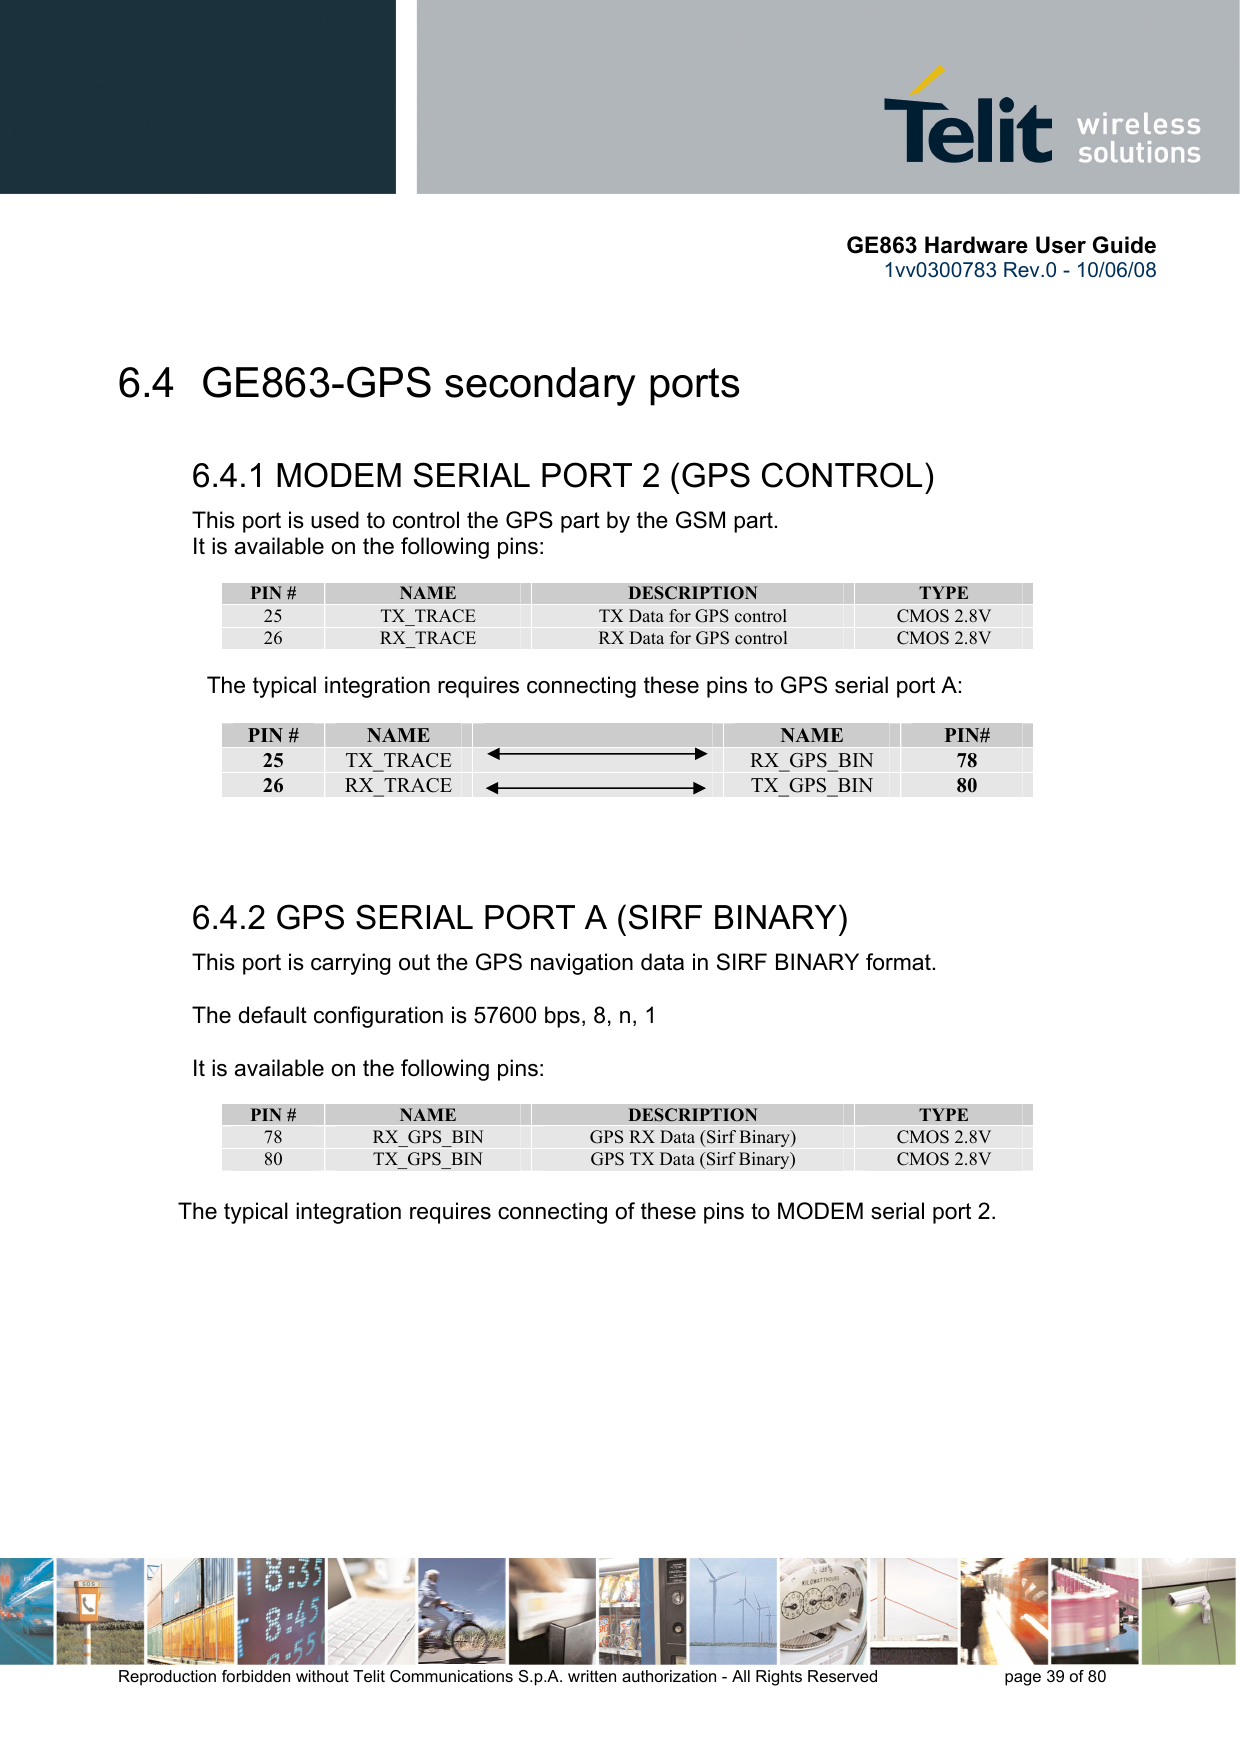       GE863 Hardware User Guide 1vv0300783 Rev.0 - 10/06/08 Reproduction forbidden without Telit Communications S.p.A. written authorization - All Rights Reserved    page 39 of 80   6.4  GE863-GPS secondary ports 6.4.1 MODEM SERIAL PORT 2 (GPS CONTROL) This port is used to control the GPS part by the GSM part.  It is available on the following pins:  PIN #  NAME  DESCRIPTION  TYPE 25  TX_TRACE  TX Data for GPS control  CMOS 2.8V 26  RX_TRACE  RX Data for GPS control  CMOS 2.8V  The typical integration requires connecting these pins to GPS serial port A:  PIN #  NAME   NAME  PIN# 25  TX_TRACE   RX_GPS_BIN  78 26  RX_TRACE   TX_GPS_BIN  80   6.4.2 GPS SERIAL PORT A (SIRF BINARY) This port is carrying out the GPS navigation data in SIRF BINARY format.  The default configuration is 57600 bps, 8, n, 1  It is available on the following pins:  PIN #  NAME  DESCRIPTION  TYPE 78  RX_GPS_BIN  GPS RX Data (Sirf Binary)  CMOS 2.8V 80  TX_GPS_BIN  GPS TX Data (Sirf Binary)  CMOS 2.8V  The typical integration requires connecting of these pins to MODEM serial port 2. 